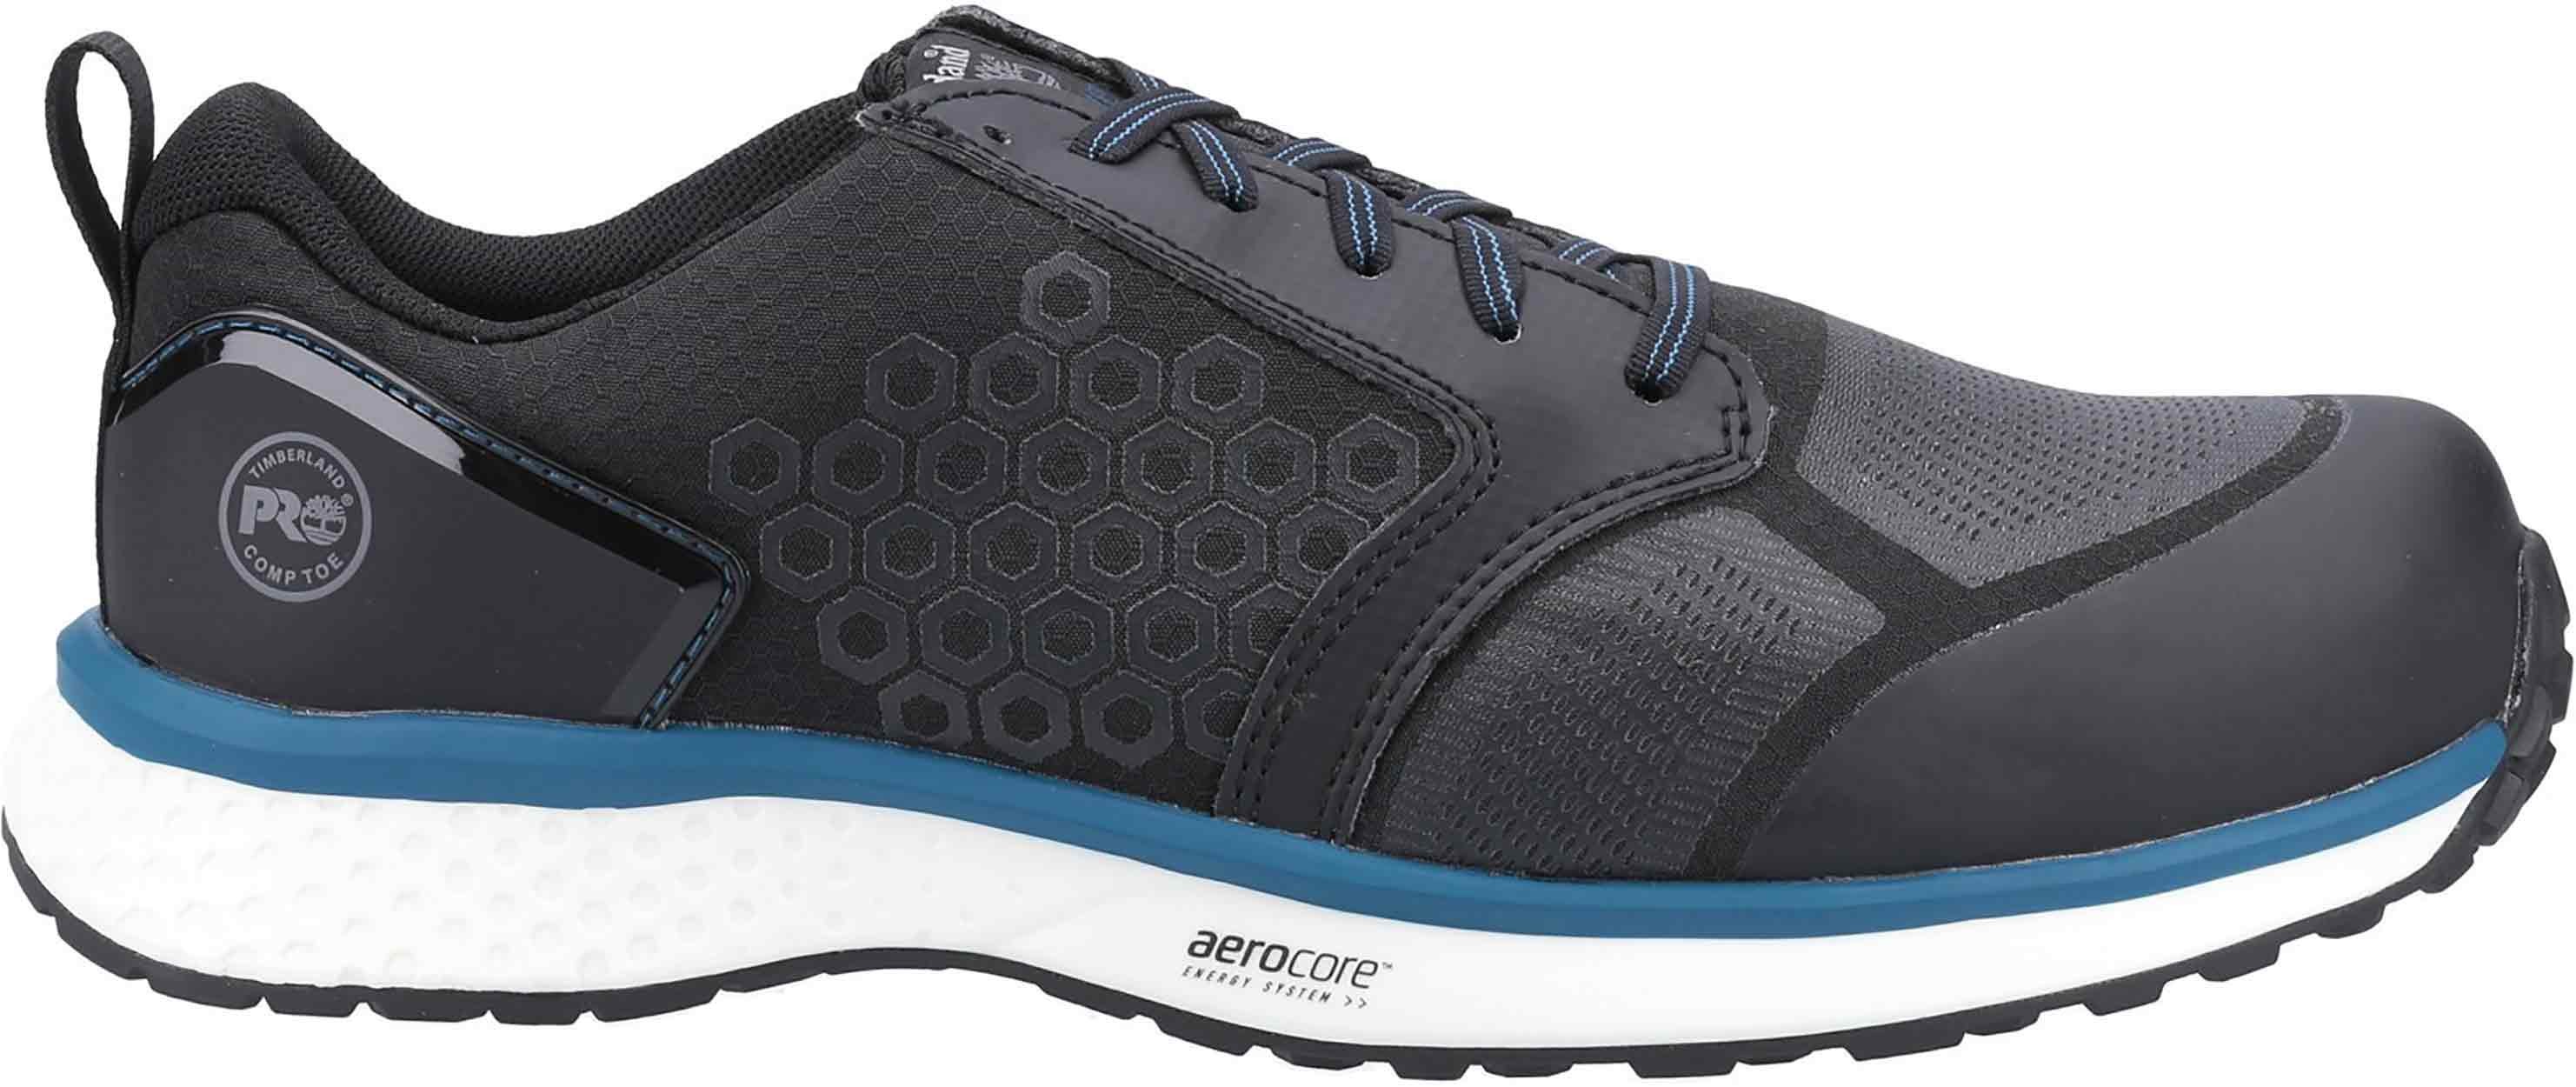 Timberland Pro Reaxion S3 Trainer Black/Blue - Composite and Metal Free  Safety Footwear - Mens Safety Boots & Shoes - Safety Footwear - Best  Workwear